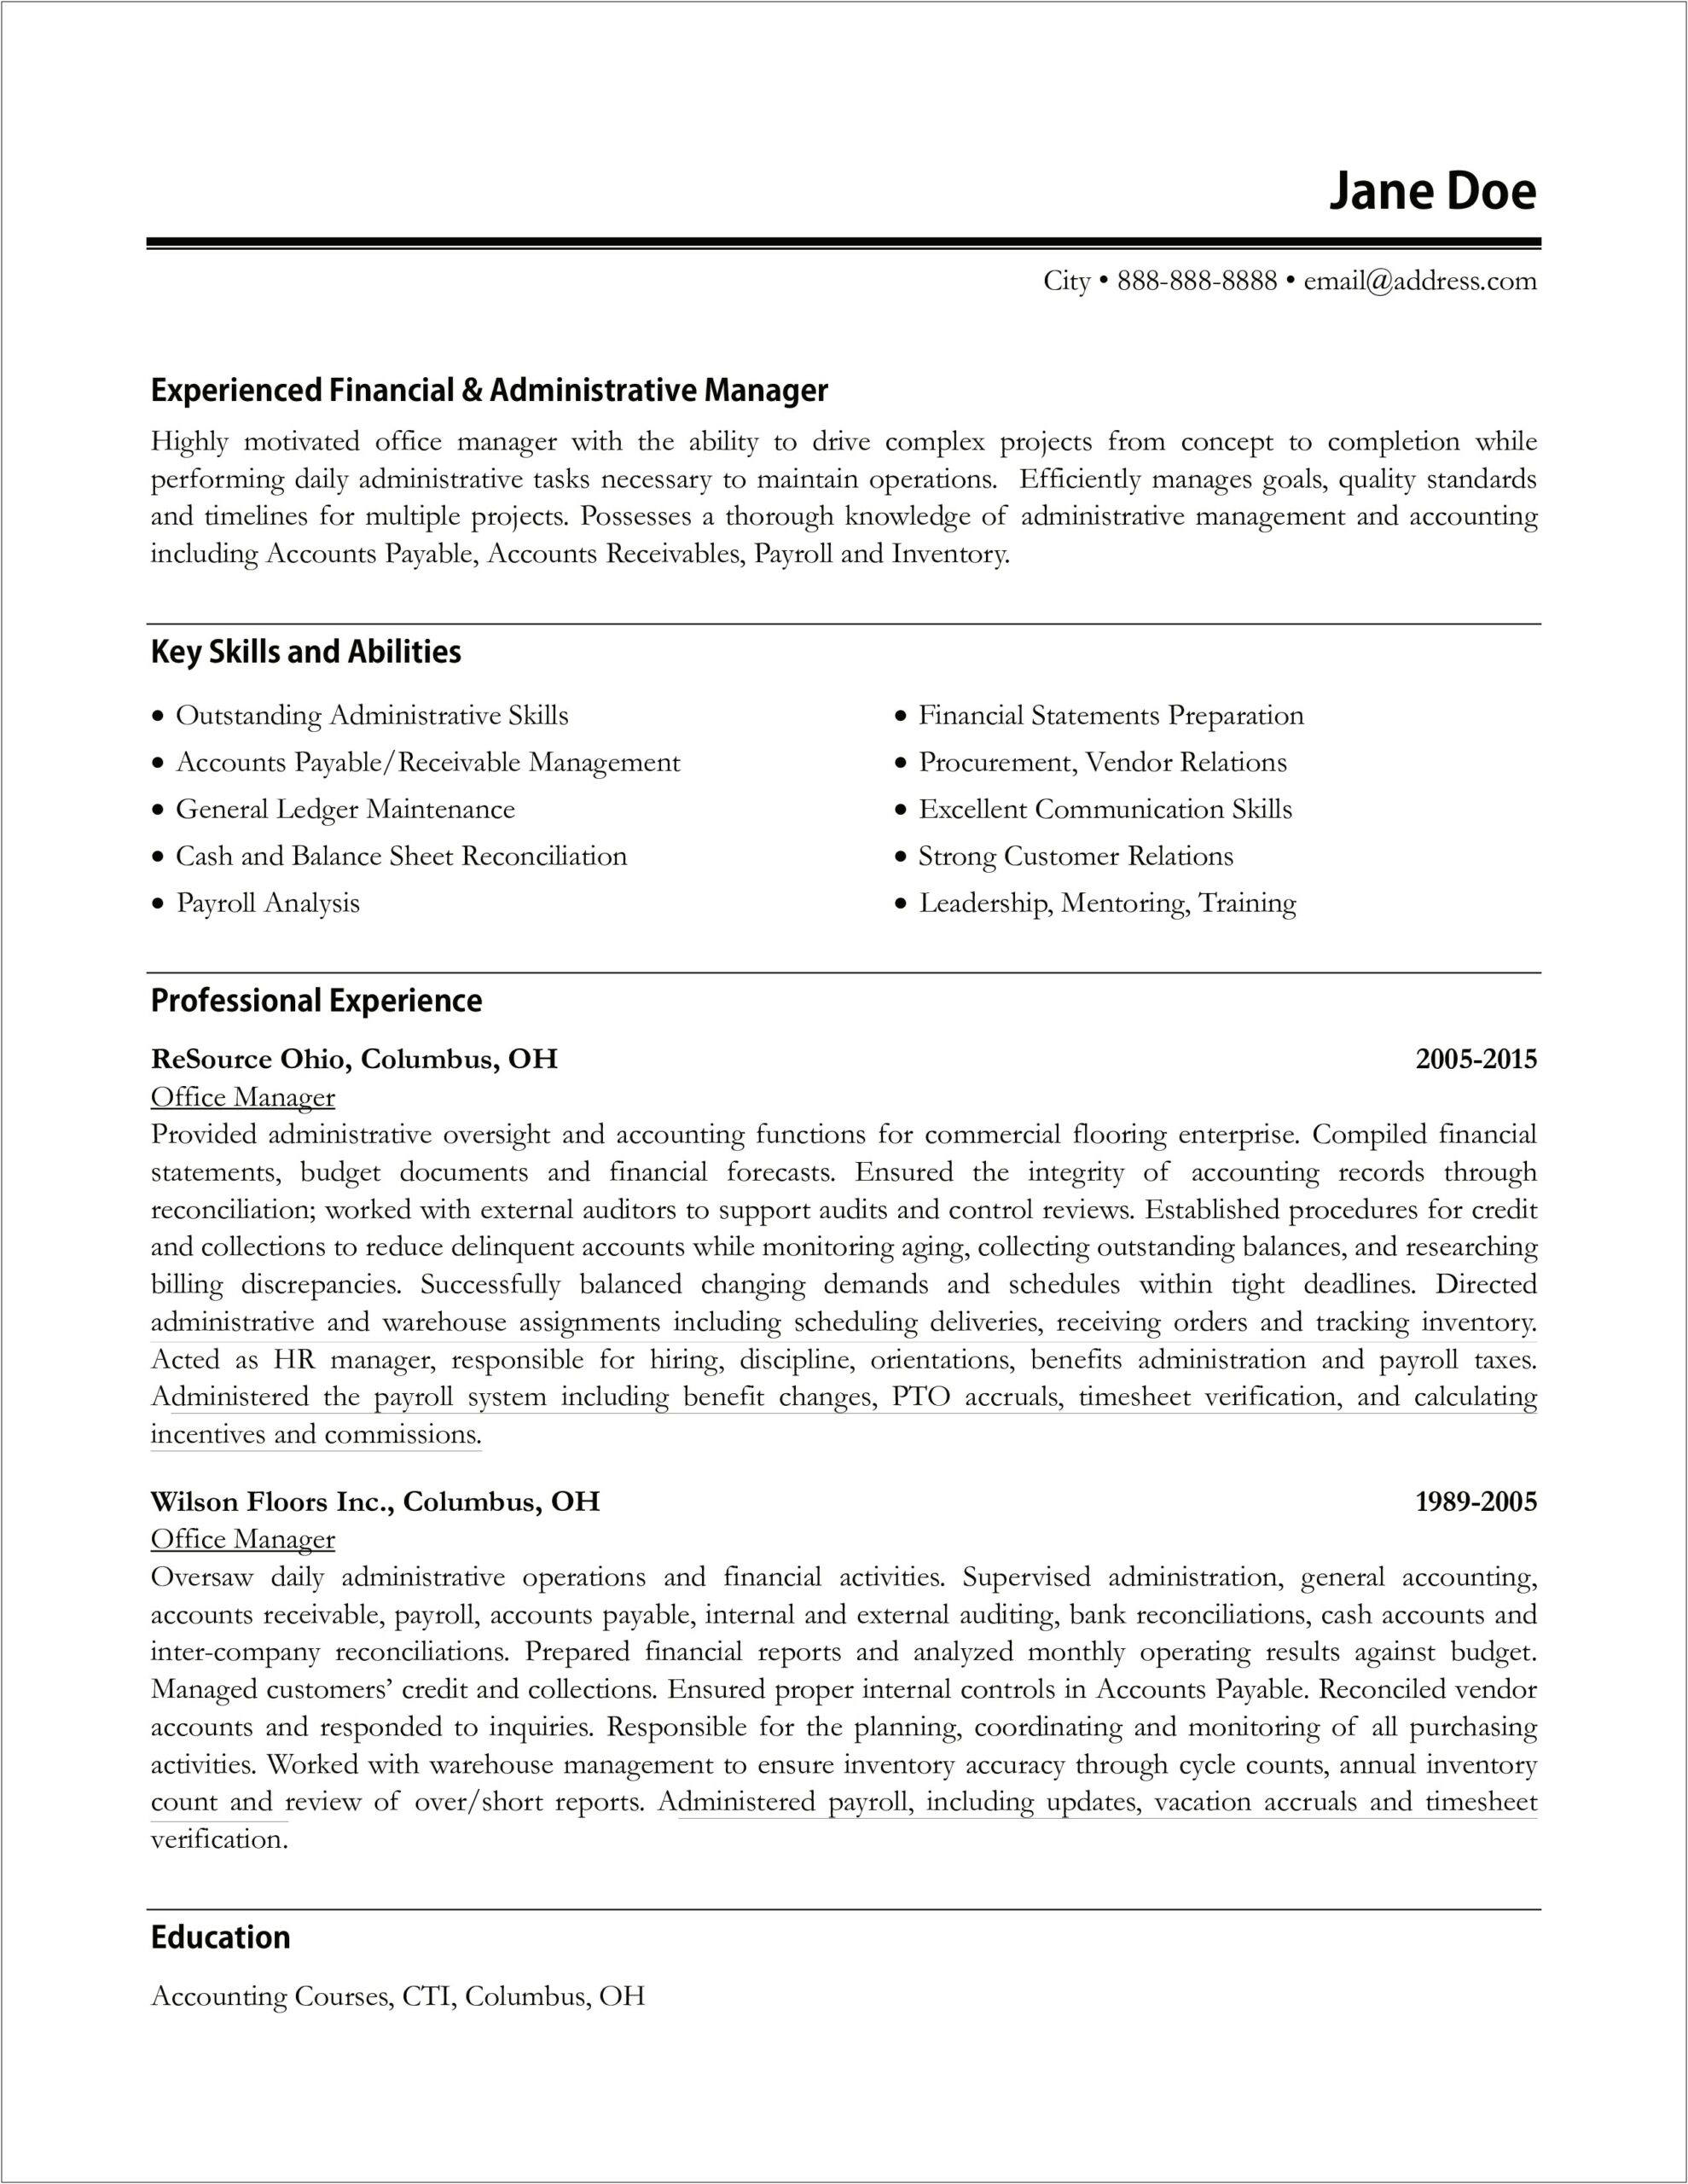 Sample Resume For Administrative Manager